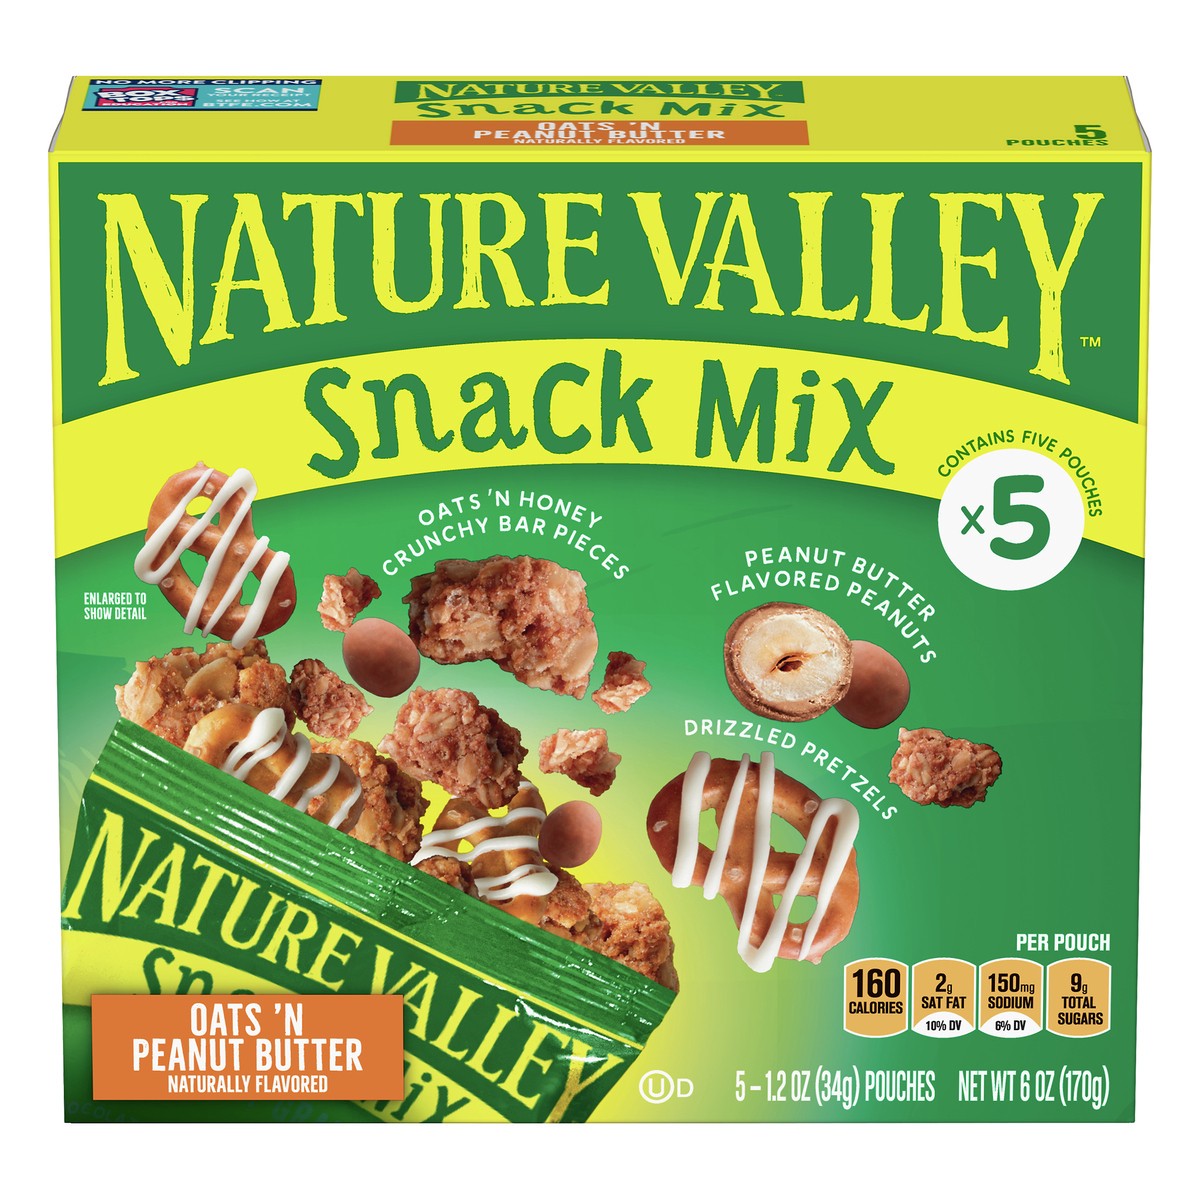 slide 1 of 9, Nature Valley Oats 'N Peanut Butter Snack Mix 5 ea, 5 ct; 1.2 oz